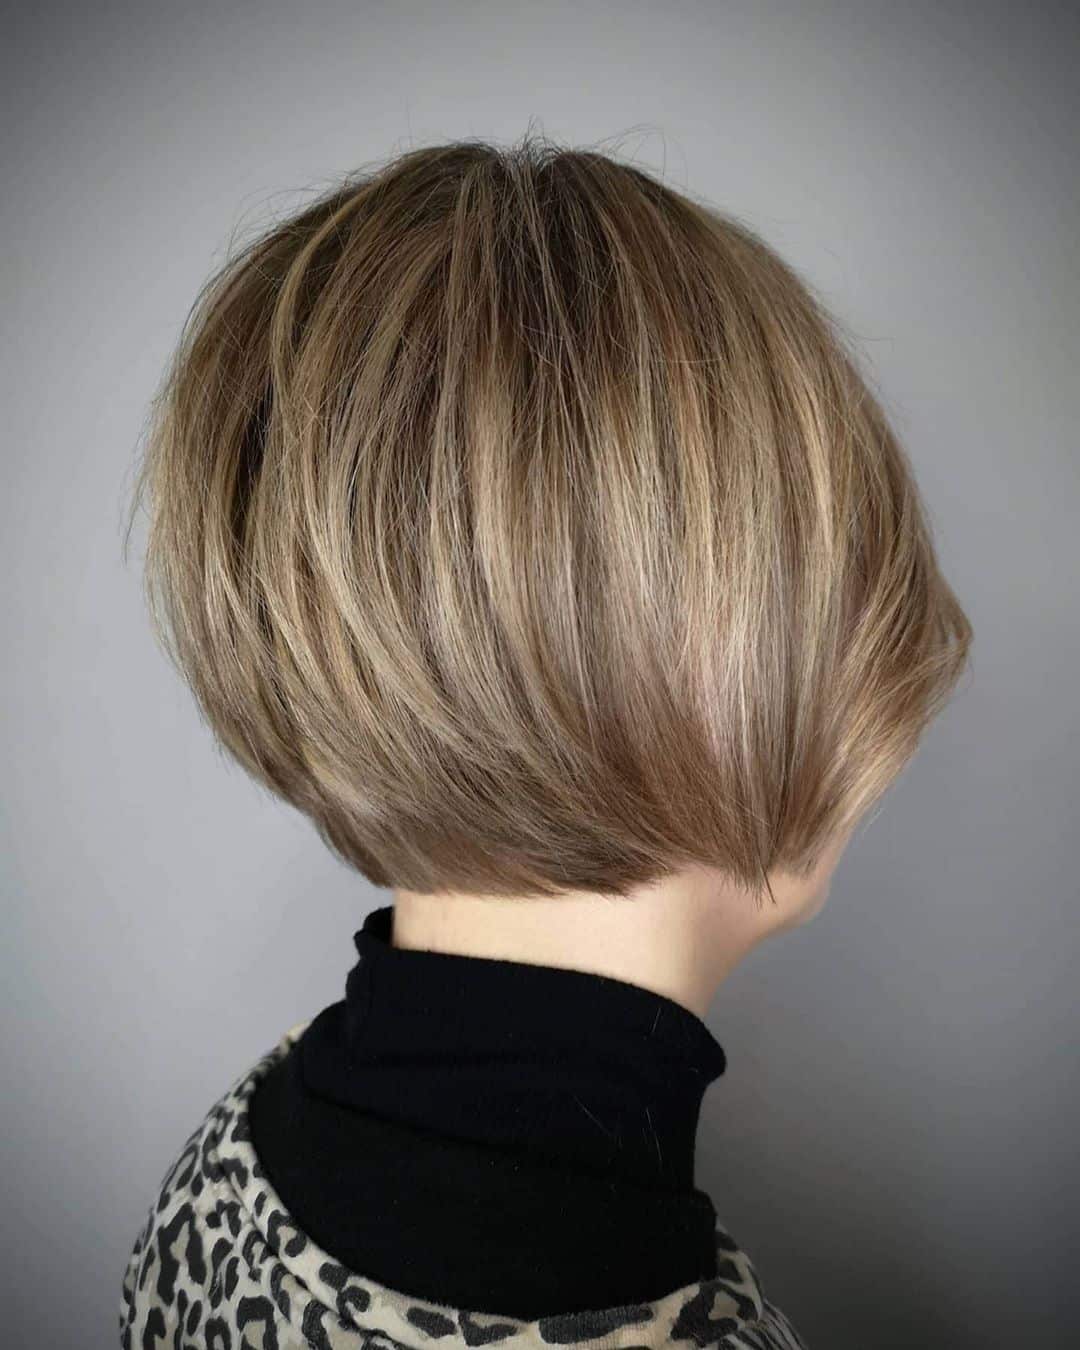 Short Layered Inverted Hair with a Back View